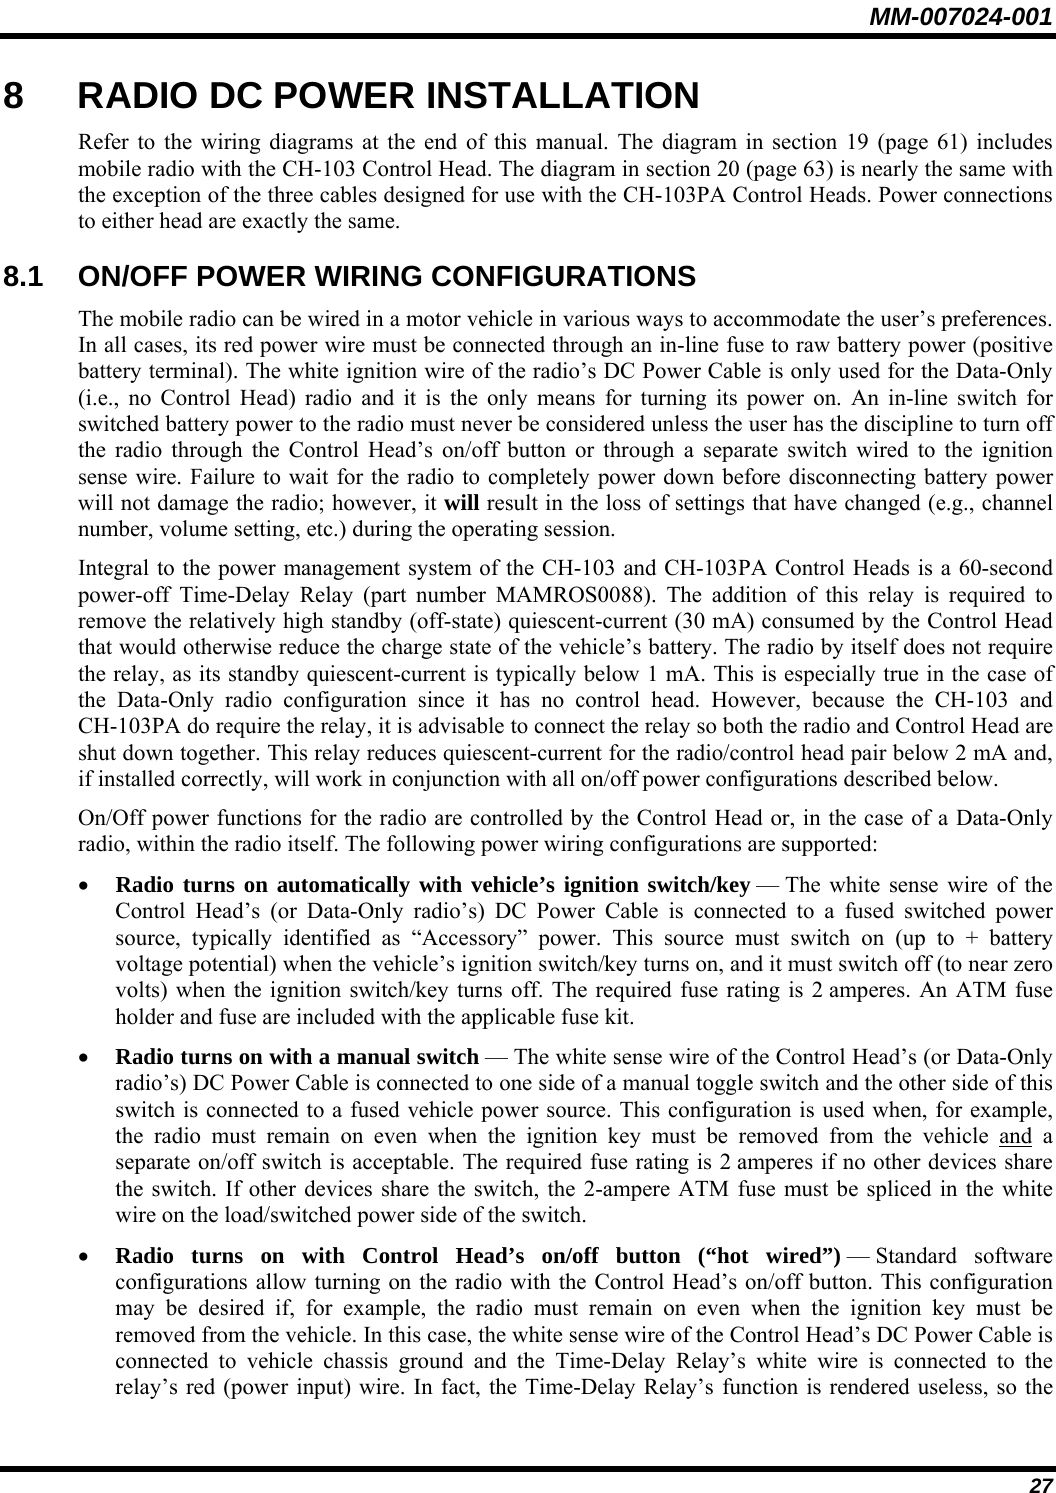 MM-007024-001 27 8  RADIO DC POWER INSTALLATION Refer to the wiring diagrams at the end of this manual. The diagram in section 19 (page 61) includes mobile radio with the CH-103 Control Head. The diagram in section 20 (page 63) is nearly the same with the exception of the three cables designed for use with the CH-103PA Control Heads. Power connections to either head are exactly the same. 8.1  ON/OFF POWER WIRING CONFIGURATIONS The mobile radio can be wired in a motor vehicle in various ways to accommodate the user’s preferences. In all cases, its red power wire must be connected through an in-line fuse to raw battery power (positive battery terminal). The white ignition wire of the radio’s DC Power Cable is only used for the Data-Only (i.e., no Control Head) radio and it is the only means for turning its power on. An in-line switch for switched battery power to the radio must never be considered unless the user has the discipline to turn off the radio through the Control Head’s on/off button or through a separate switch wired to the ignition sense wire. Failure to wait for the radio to completely power down before disconnecting battery power will not damage the radio; however, it will result in the loss of settings that have changed (e.g., channel number, volume setting, etc.) during the operating session. Integral to the power management system of the CH-103 and CH-103PA Control Heads is a 60-second power-off Time-Delay Relay (part number MAMROS0088). The addition of this relay is required to remove the relatively high standby (off-state) quiescent-current (30 mA) consumed by the Control Head that would otherwise reduce the charge state of the vehicle’s battery. The radio by itself does not require the relay, as its standby quiescent-current is typically below 1 mA. This is especially true in the case of the Data-Only radio configuration since it has no control head. However, because the CH-103 and CH-103PA do require the relay, it is advisable to connect the relay so both the radio and Control Head are shut down together. This relay reduces quiescent-current for the radio/control head pair below 2 mA and, if installed correctly, will work in conjunction with all on/off power configurations described below. On/Off power functions for the radio are controlled by the Control Head or, in the case of a Data-Only radio, within the radio itself. The following power wiring configurations are supported: • Radio turns on automatically with vehicle’s ignition switch/key — The white sense wire of the Control Head’s (or Data-Only radio’s) DC Power Cable is connected to a fused switched power source, typically identified as “Accessory” power. This source must switch on (up to + battery voltage potential) when the vehicle’s ignition switch/key turns on, and it must switch off (to near zero volts) when the ignition switch/key turns off. The required fuse rating is 2 amperes. An ATM fuse holder and fuse are included with the applicable fuse kit. • Radio turns on with a manual switch — The white sense wire of the Control Head’s (or Data-Only radio’s) DC Power Cable is connected to one side of a manual toggle switch and the other side of this switch is connected to a fused vehicle power source. This configuration is used when, for example, the radio must remain on even when the ignition key must be removed from the vehicle and a separate on/off switch is acceptable. The required fuse rating is 2 amperes if no other devices share the switch. If other devices share the switch, the 2-ampere ATM fuse must be spliced in the white wire on the load/switched power side of the switch. • Radio turns on with Control Head’s on/off button (“hot wired”) — Standard  software configurations allow turning on the radio with the Control Head’s on/off button. This configuration may be desired if, for example, the radio must remain on even when the ignition key must be removed from the vehicle. In this case, the white sense wire of the Control Head’s DC Power Cable is connected to vehicle chassis ground and the Time-Delay Relay’s white wire is connected to the relay’s red (power input) wire. In fact, the Time-Delay Relay’s function is rendered useless, so the 